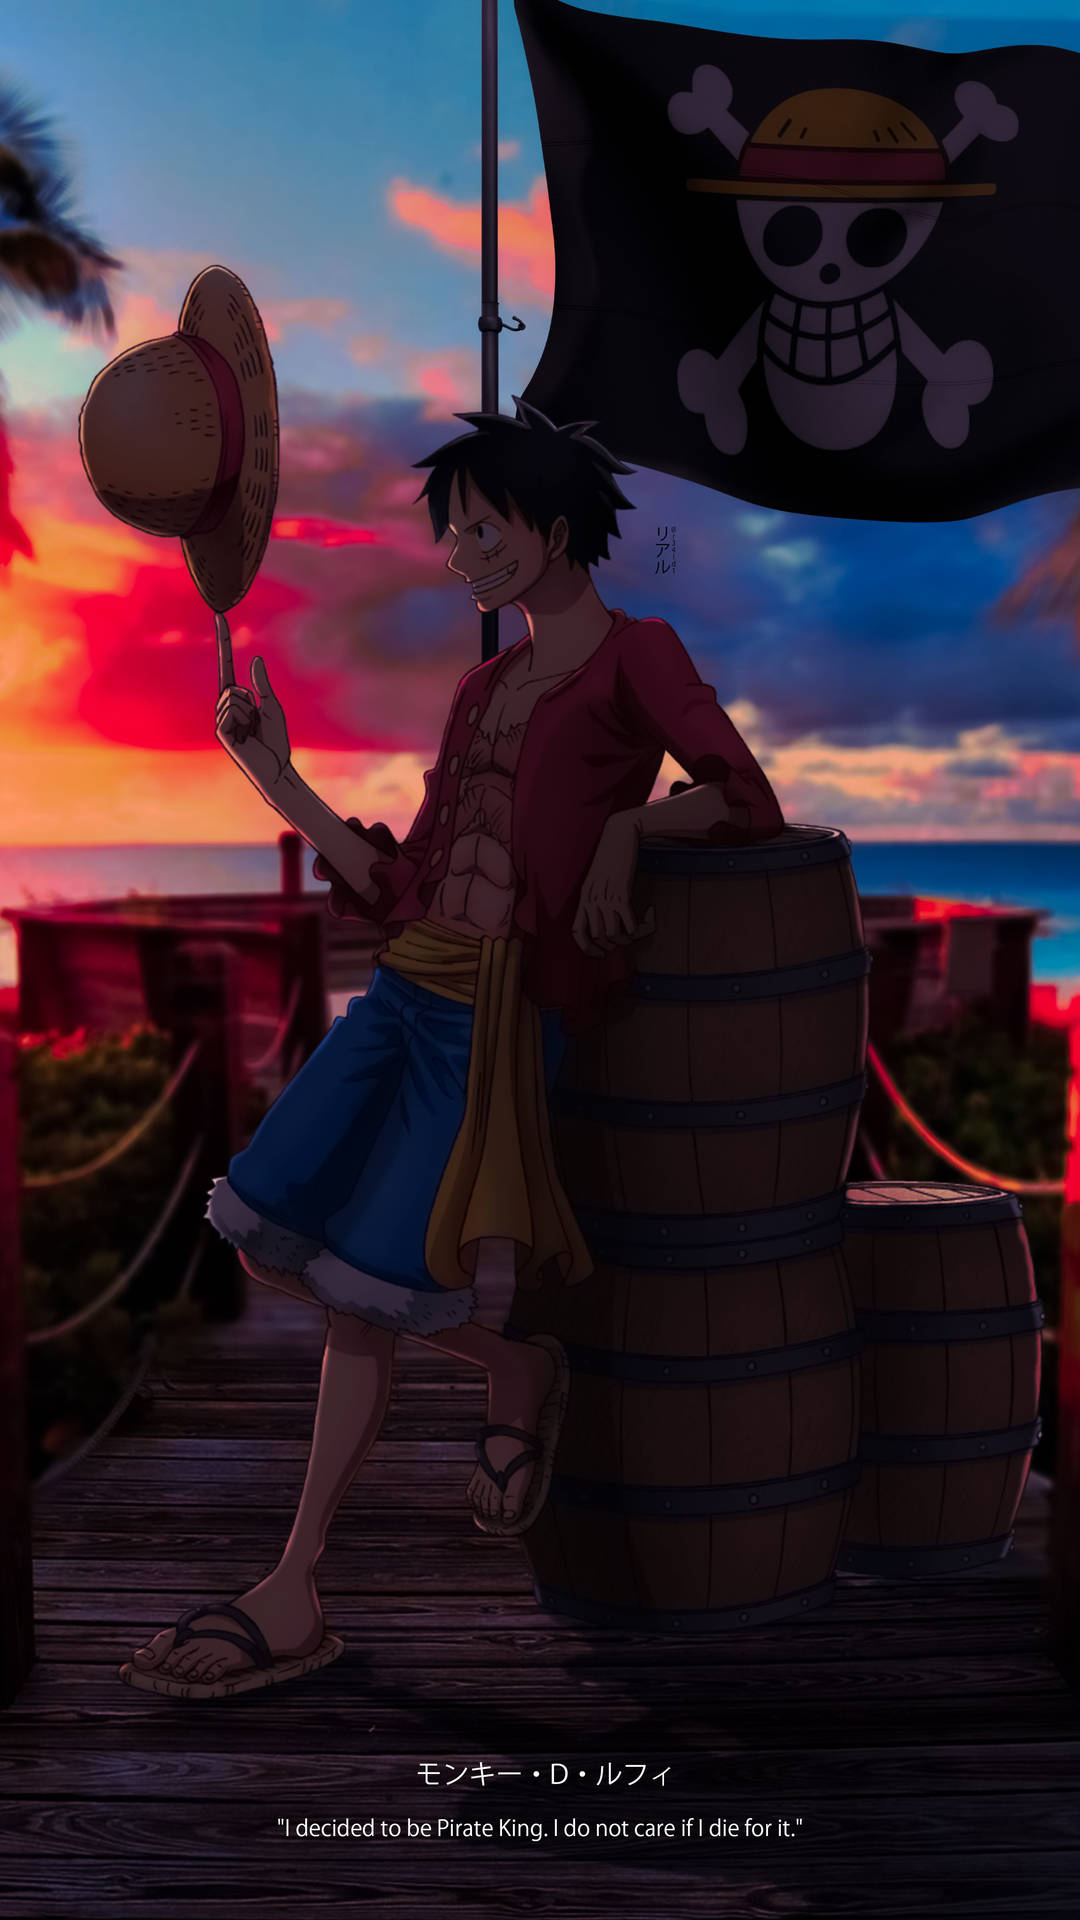 Chilling Luffy Aesthetic Wallpaper